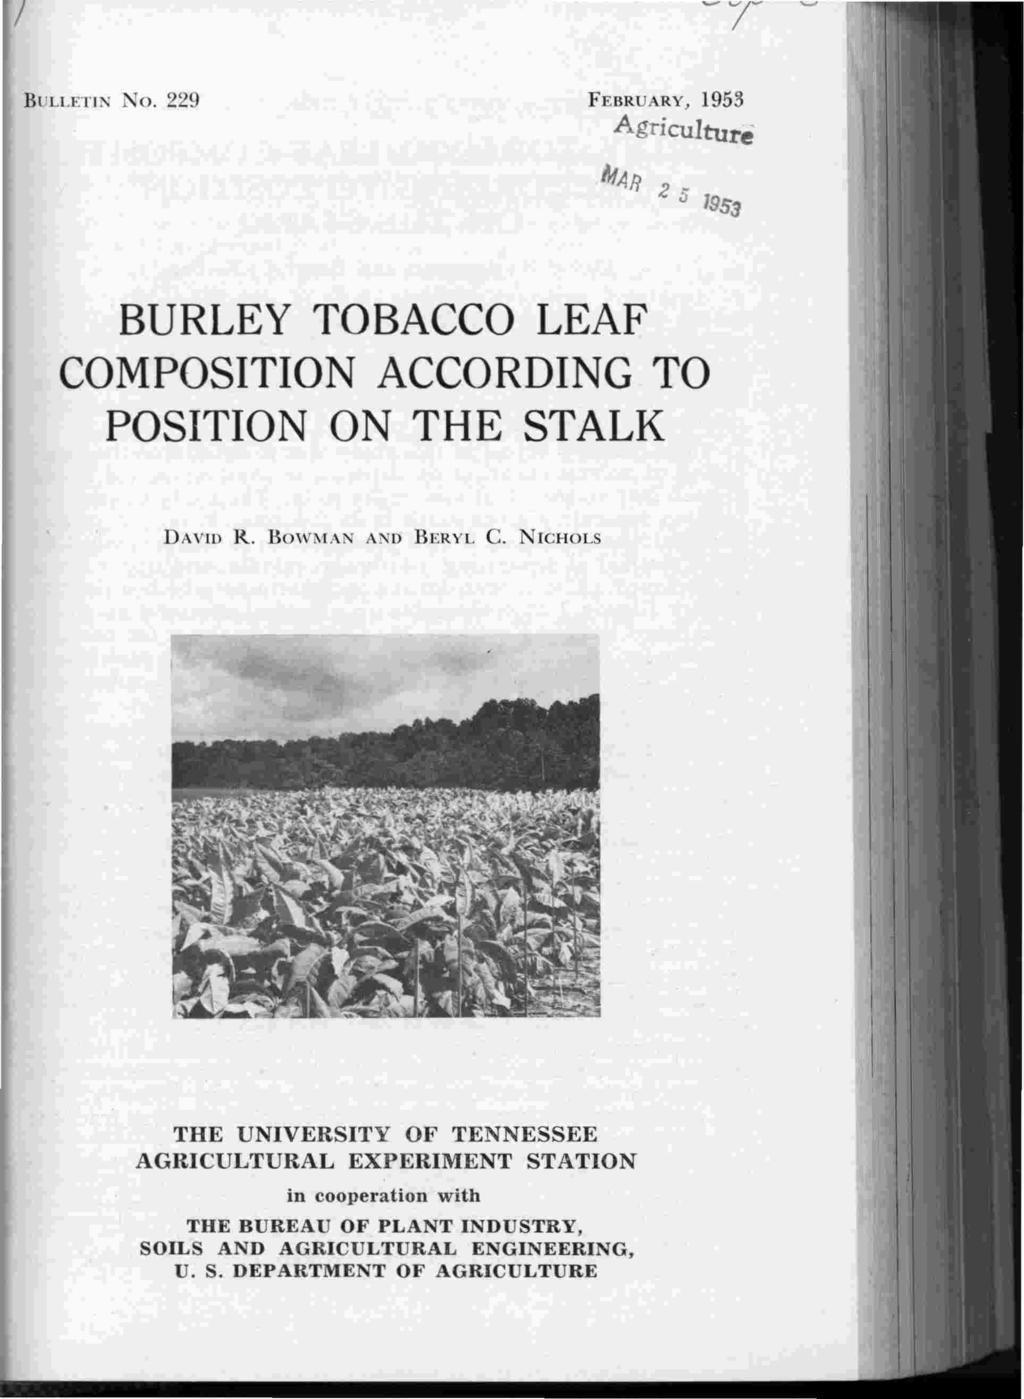 BULLETN No. 229 FEBRUARY, 1953 Agriculture MAR 2 5 1953 BURLEY TOBACCO LEAF COMPOSTON ACCORDNG TO POSTON ON THE STALK DAVD R. BOWMAN AND BERYL C.